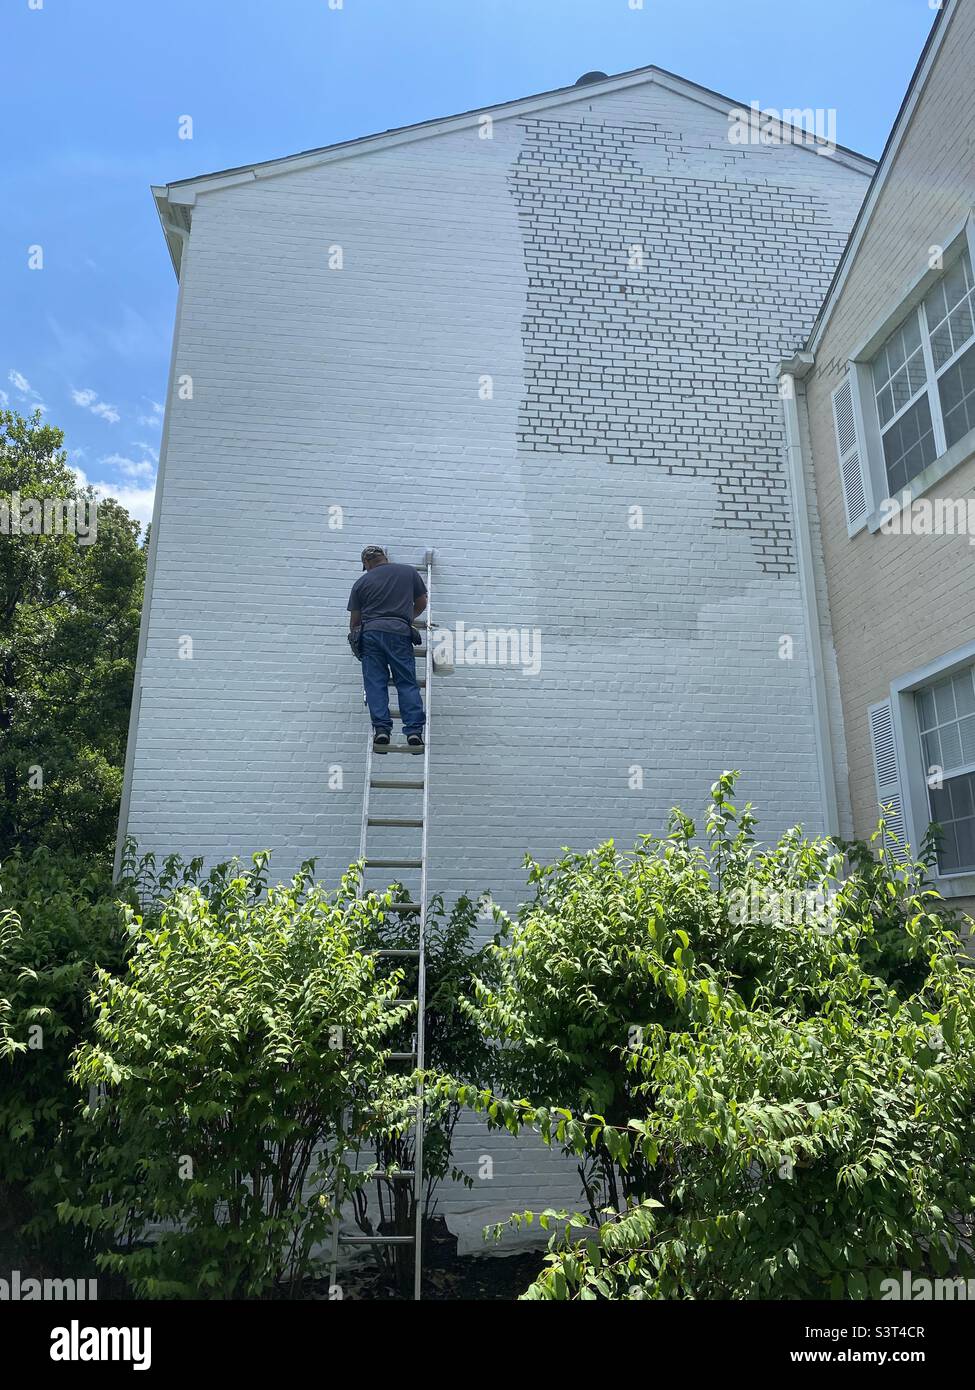 A big job. A man stands on a tall ladder painting the side of a brick building. Stock Photo